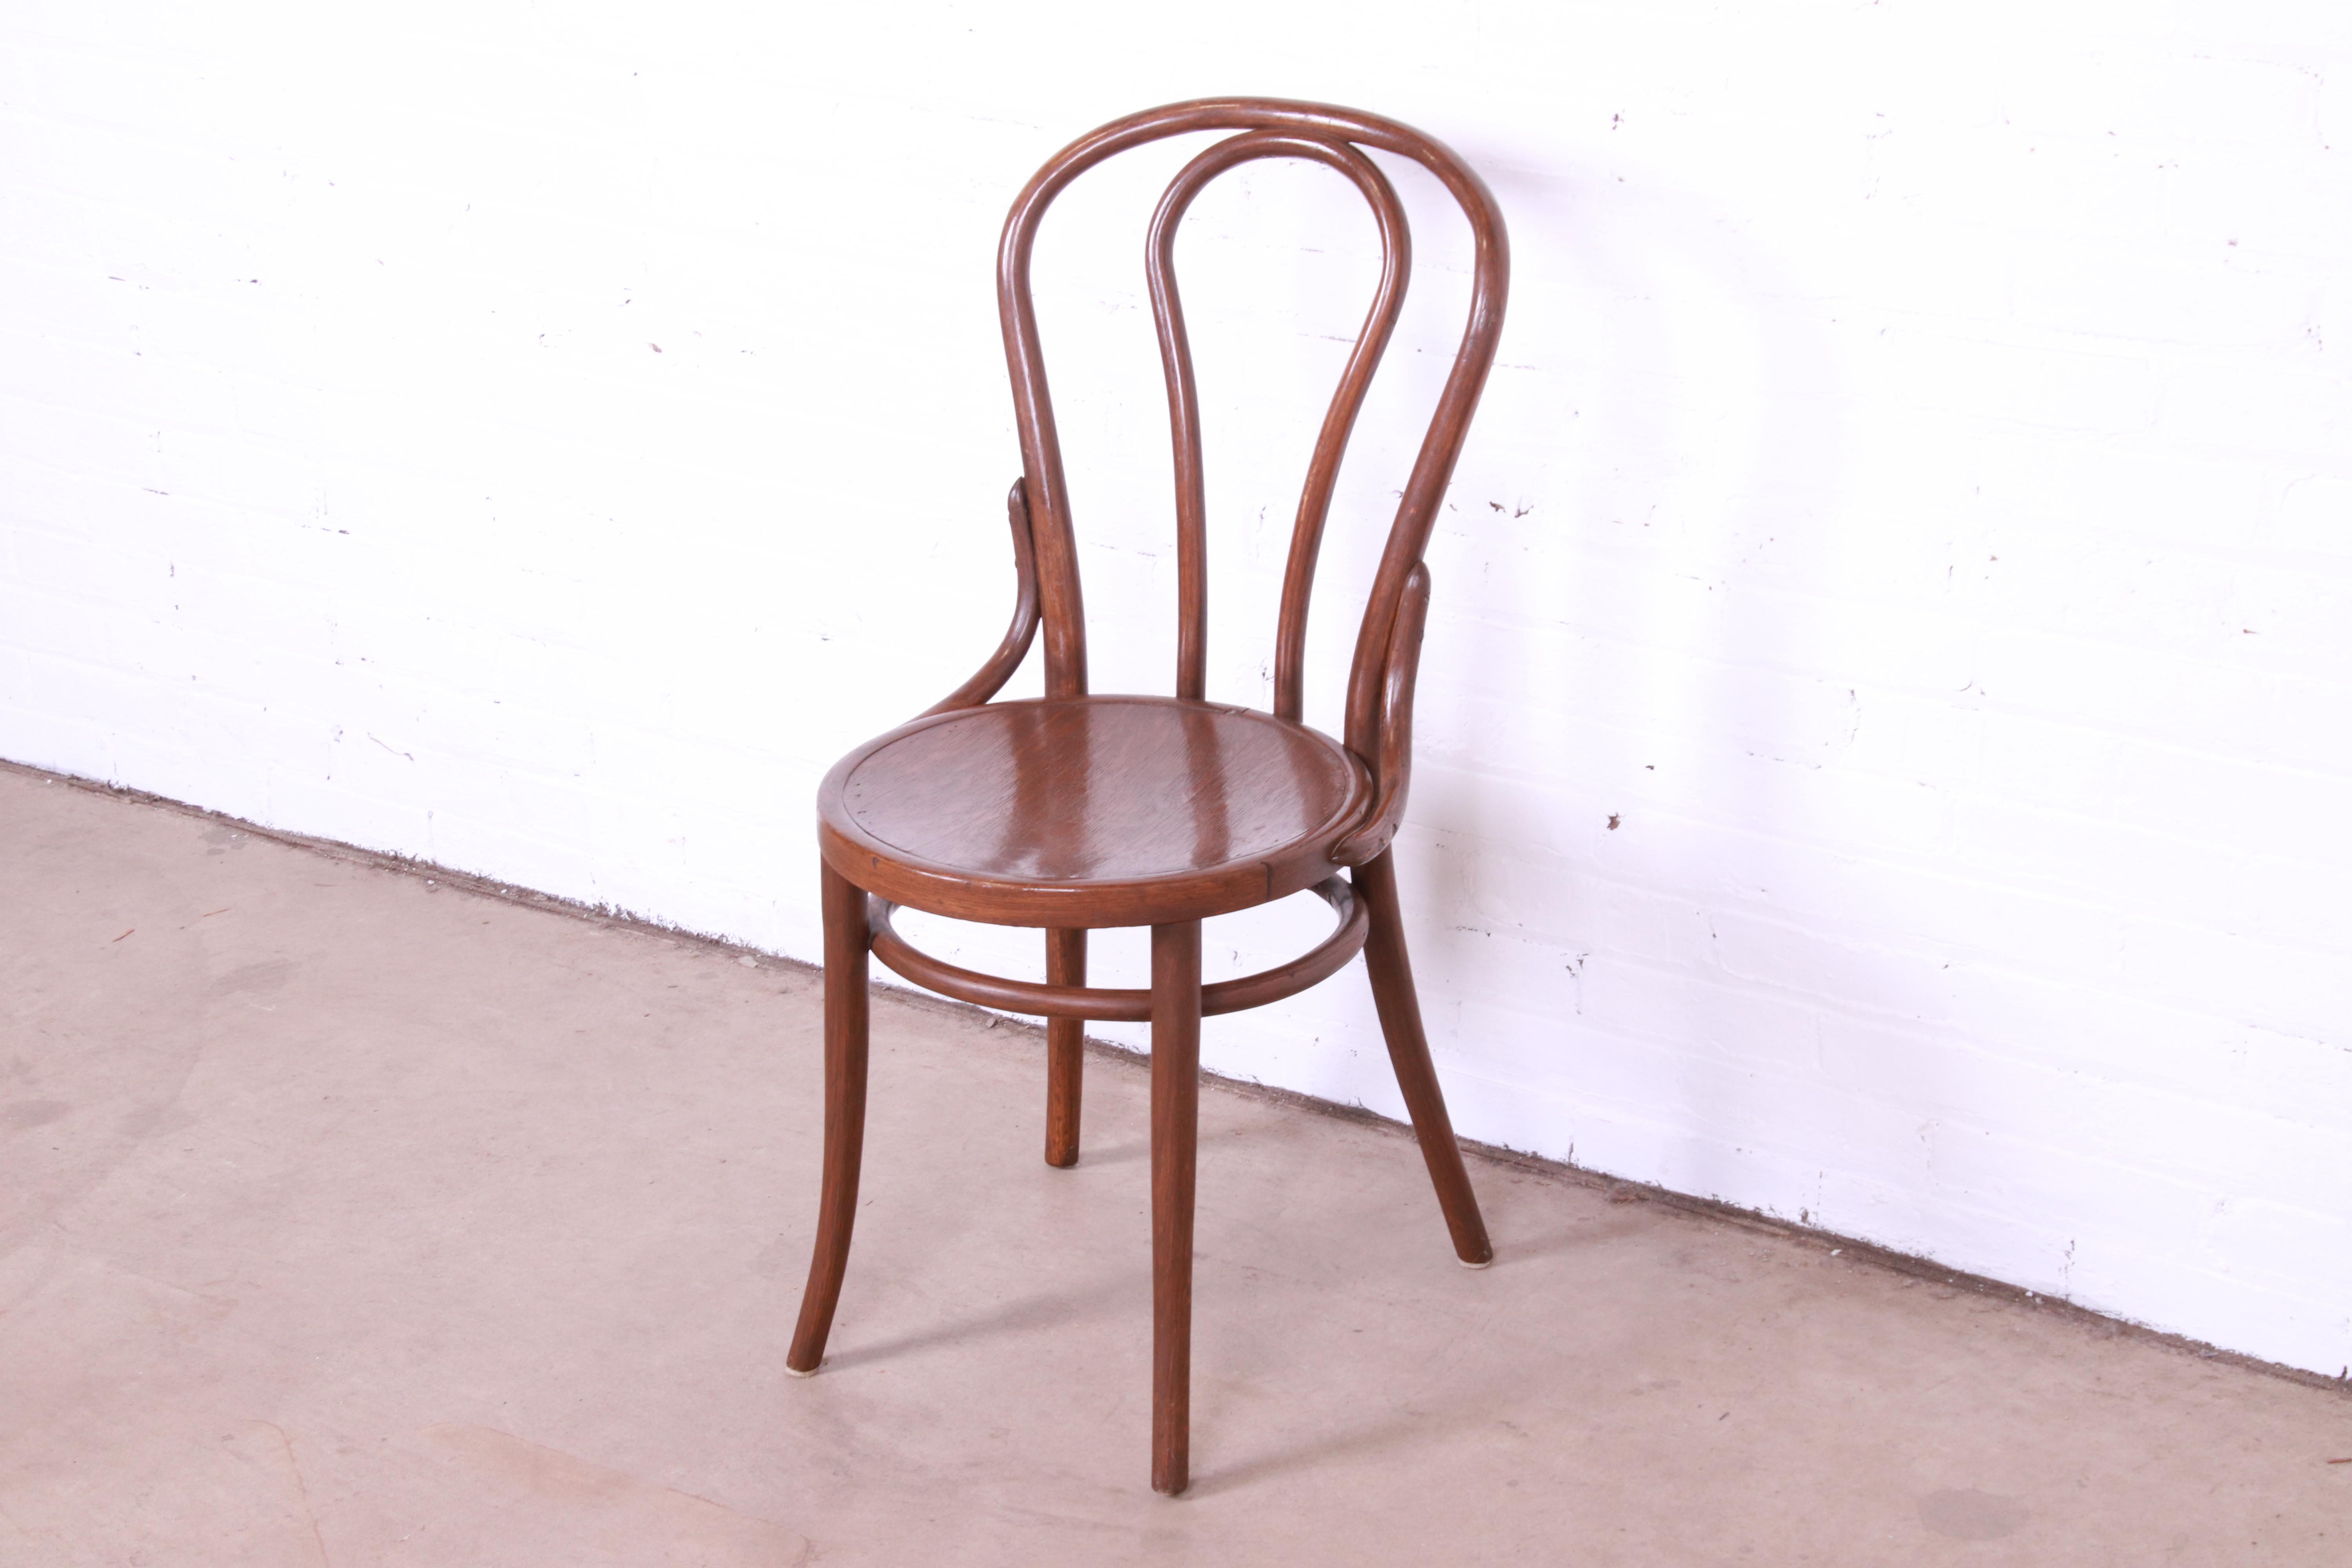 Mid-Century Modern Vintage Bentwood Desk Chair or Side Chair Attributed to Thonet